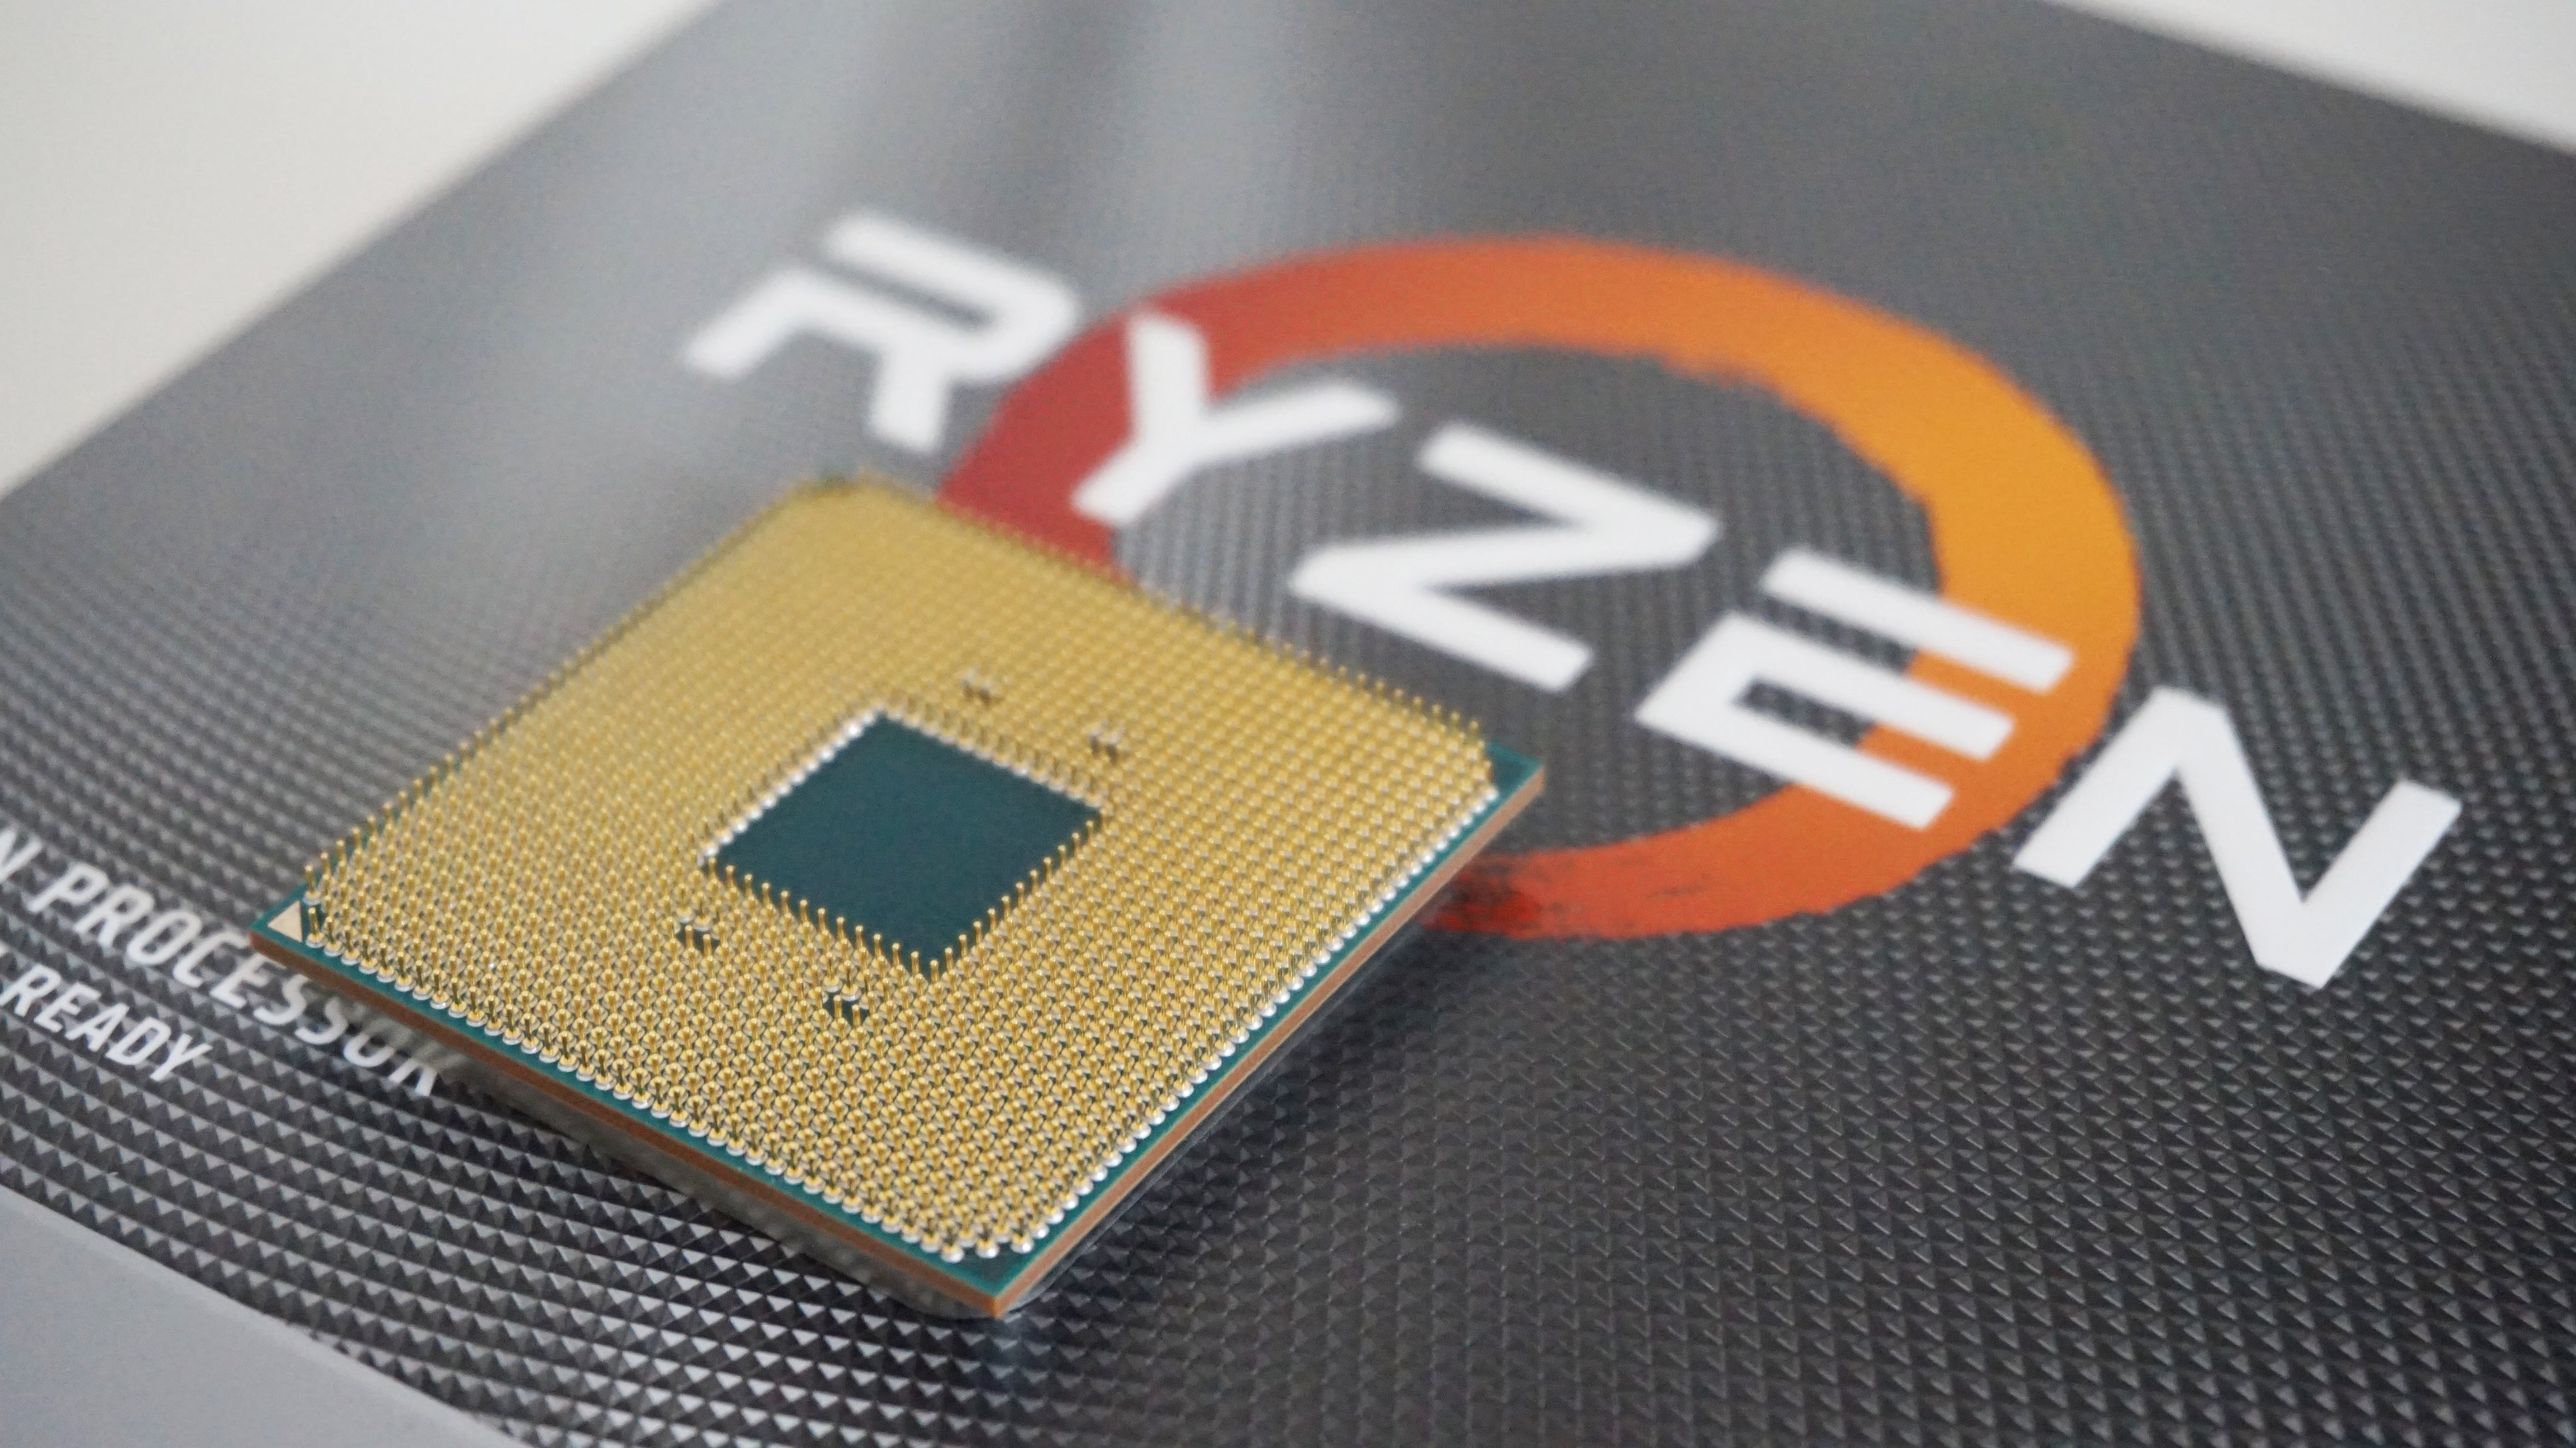 This Ryzen 5 3600 is the heart of many gaming PCs - and for £70 it